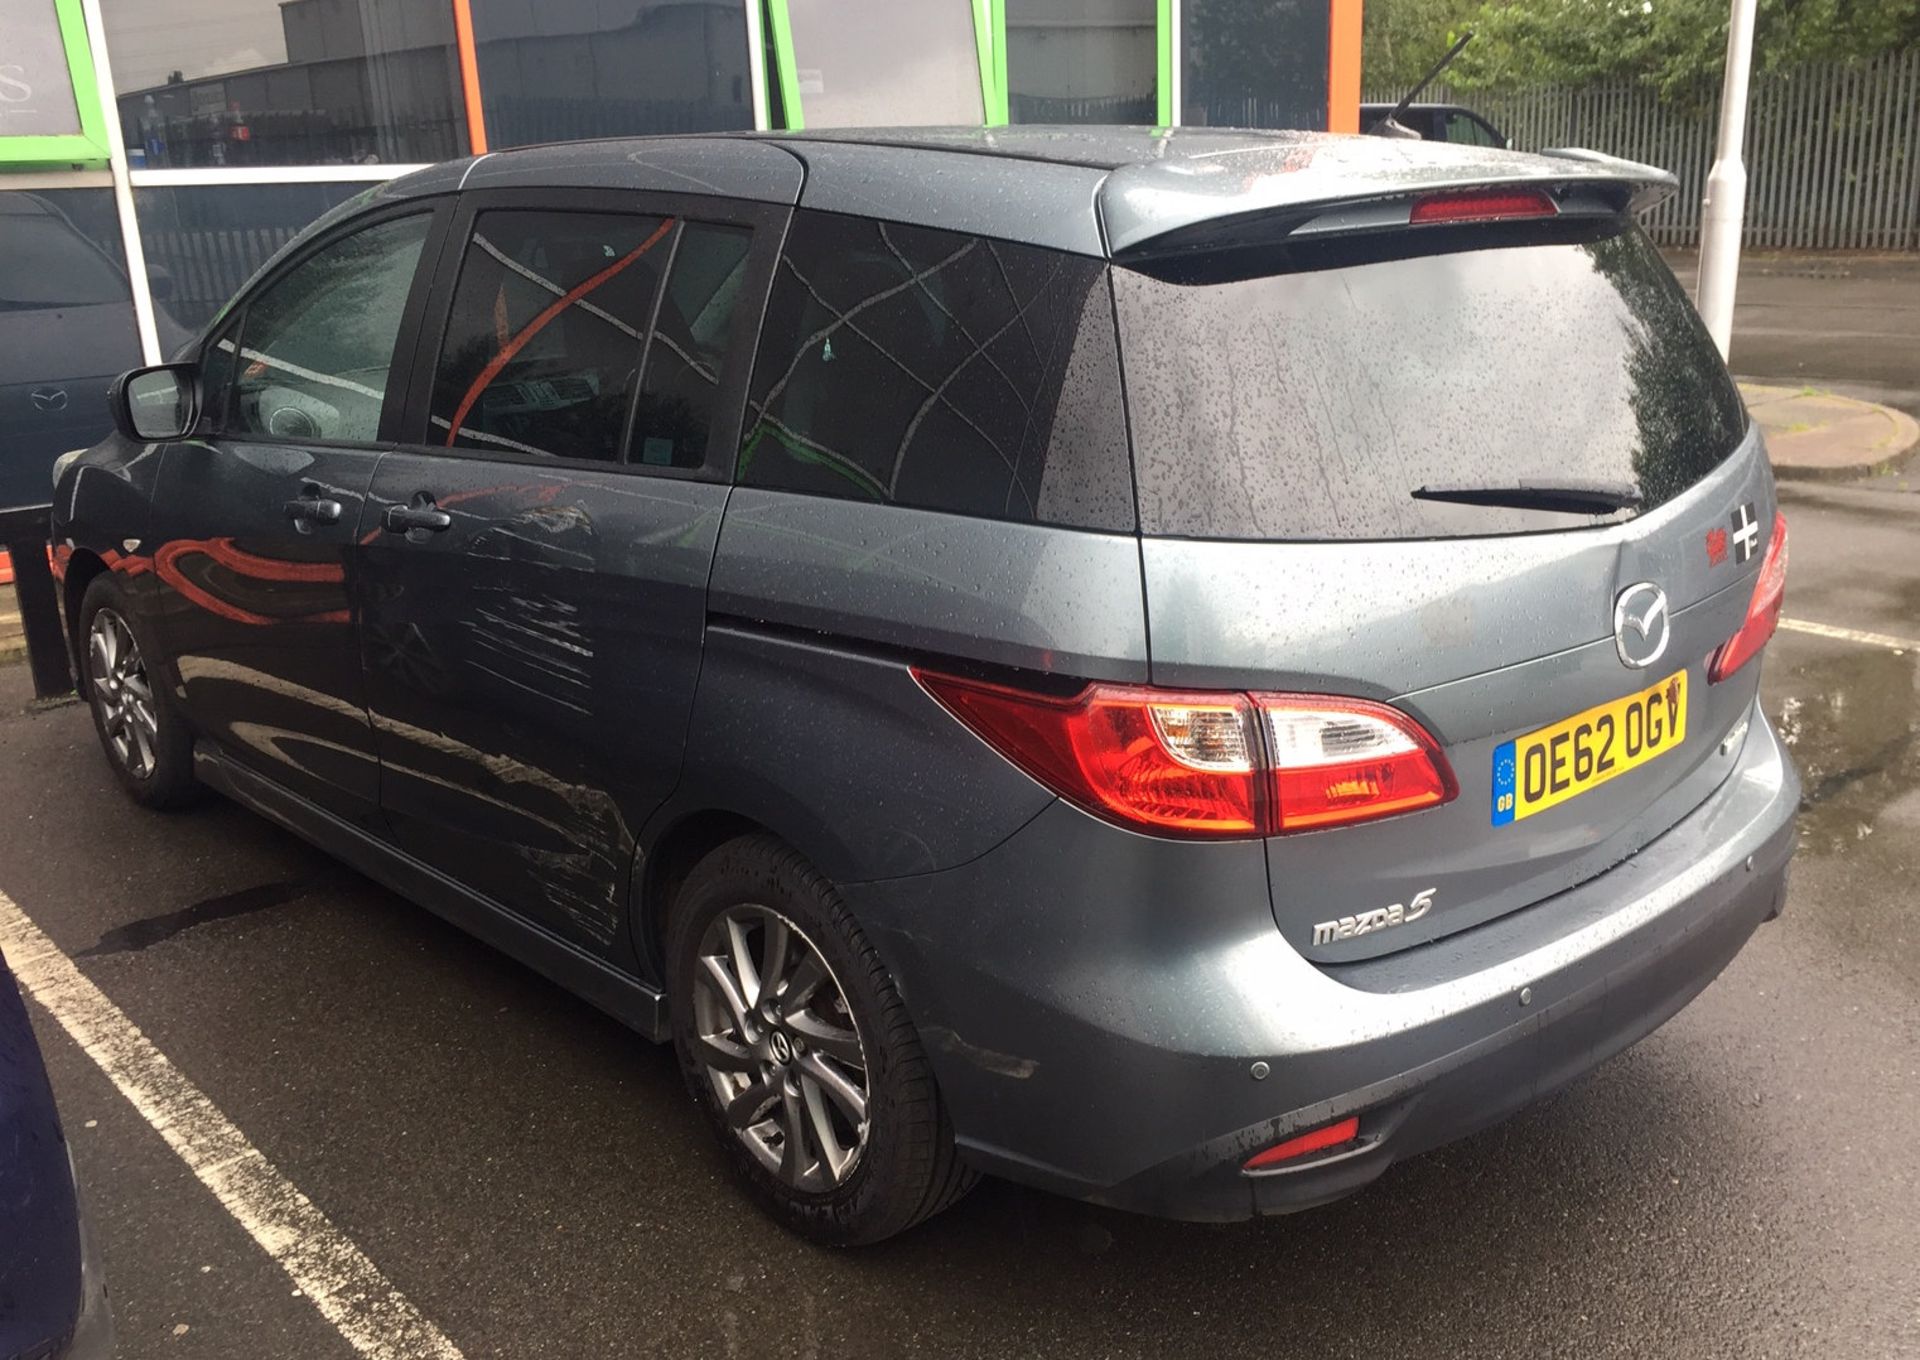 2013 Mazda 5 2.0 Venture Edition 5 Dr MPV - CL505 - NO VAT ON THE HAMMER - Location: Corby, N - Image 13 of 18